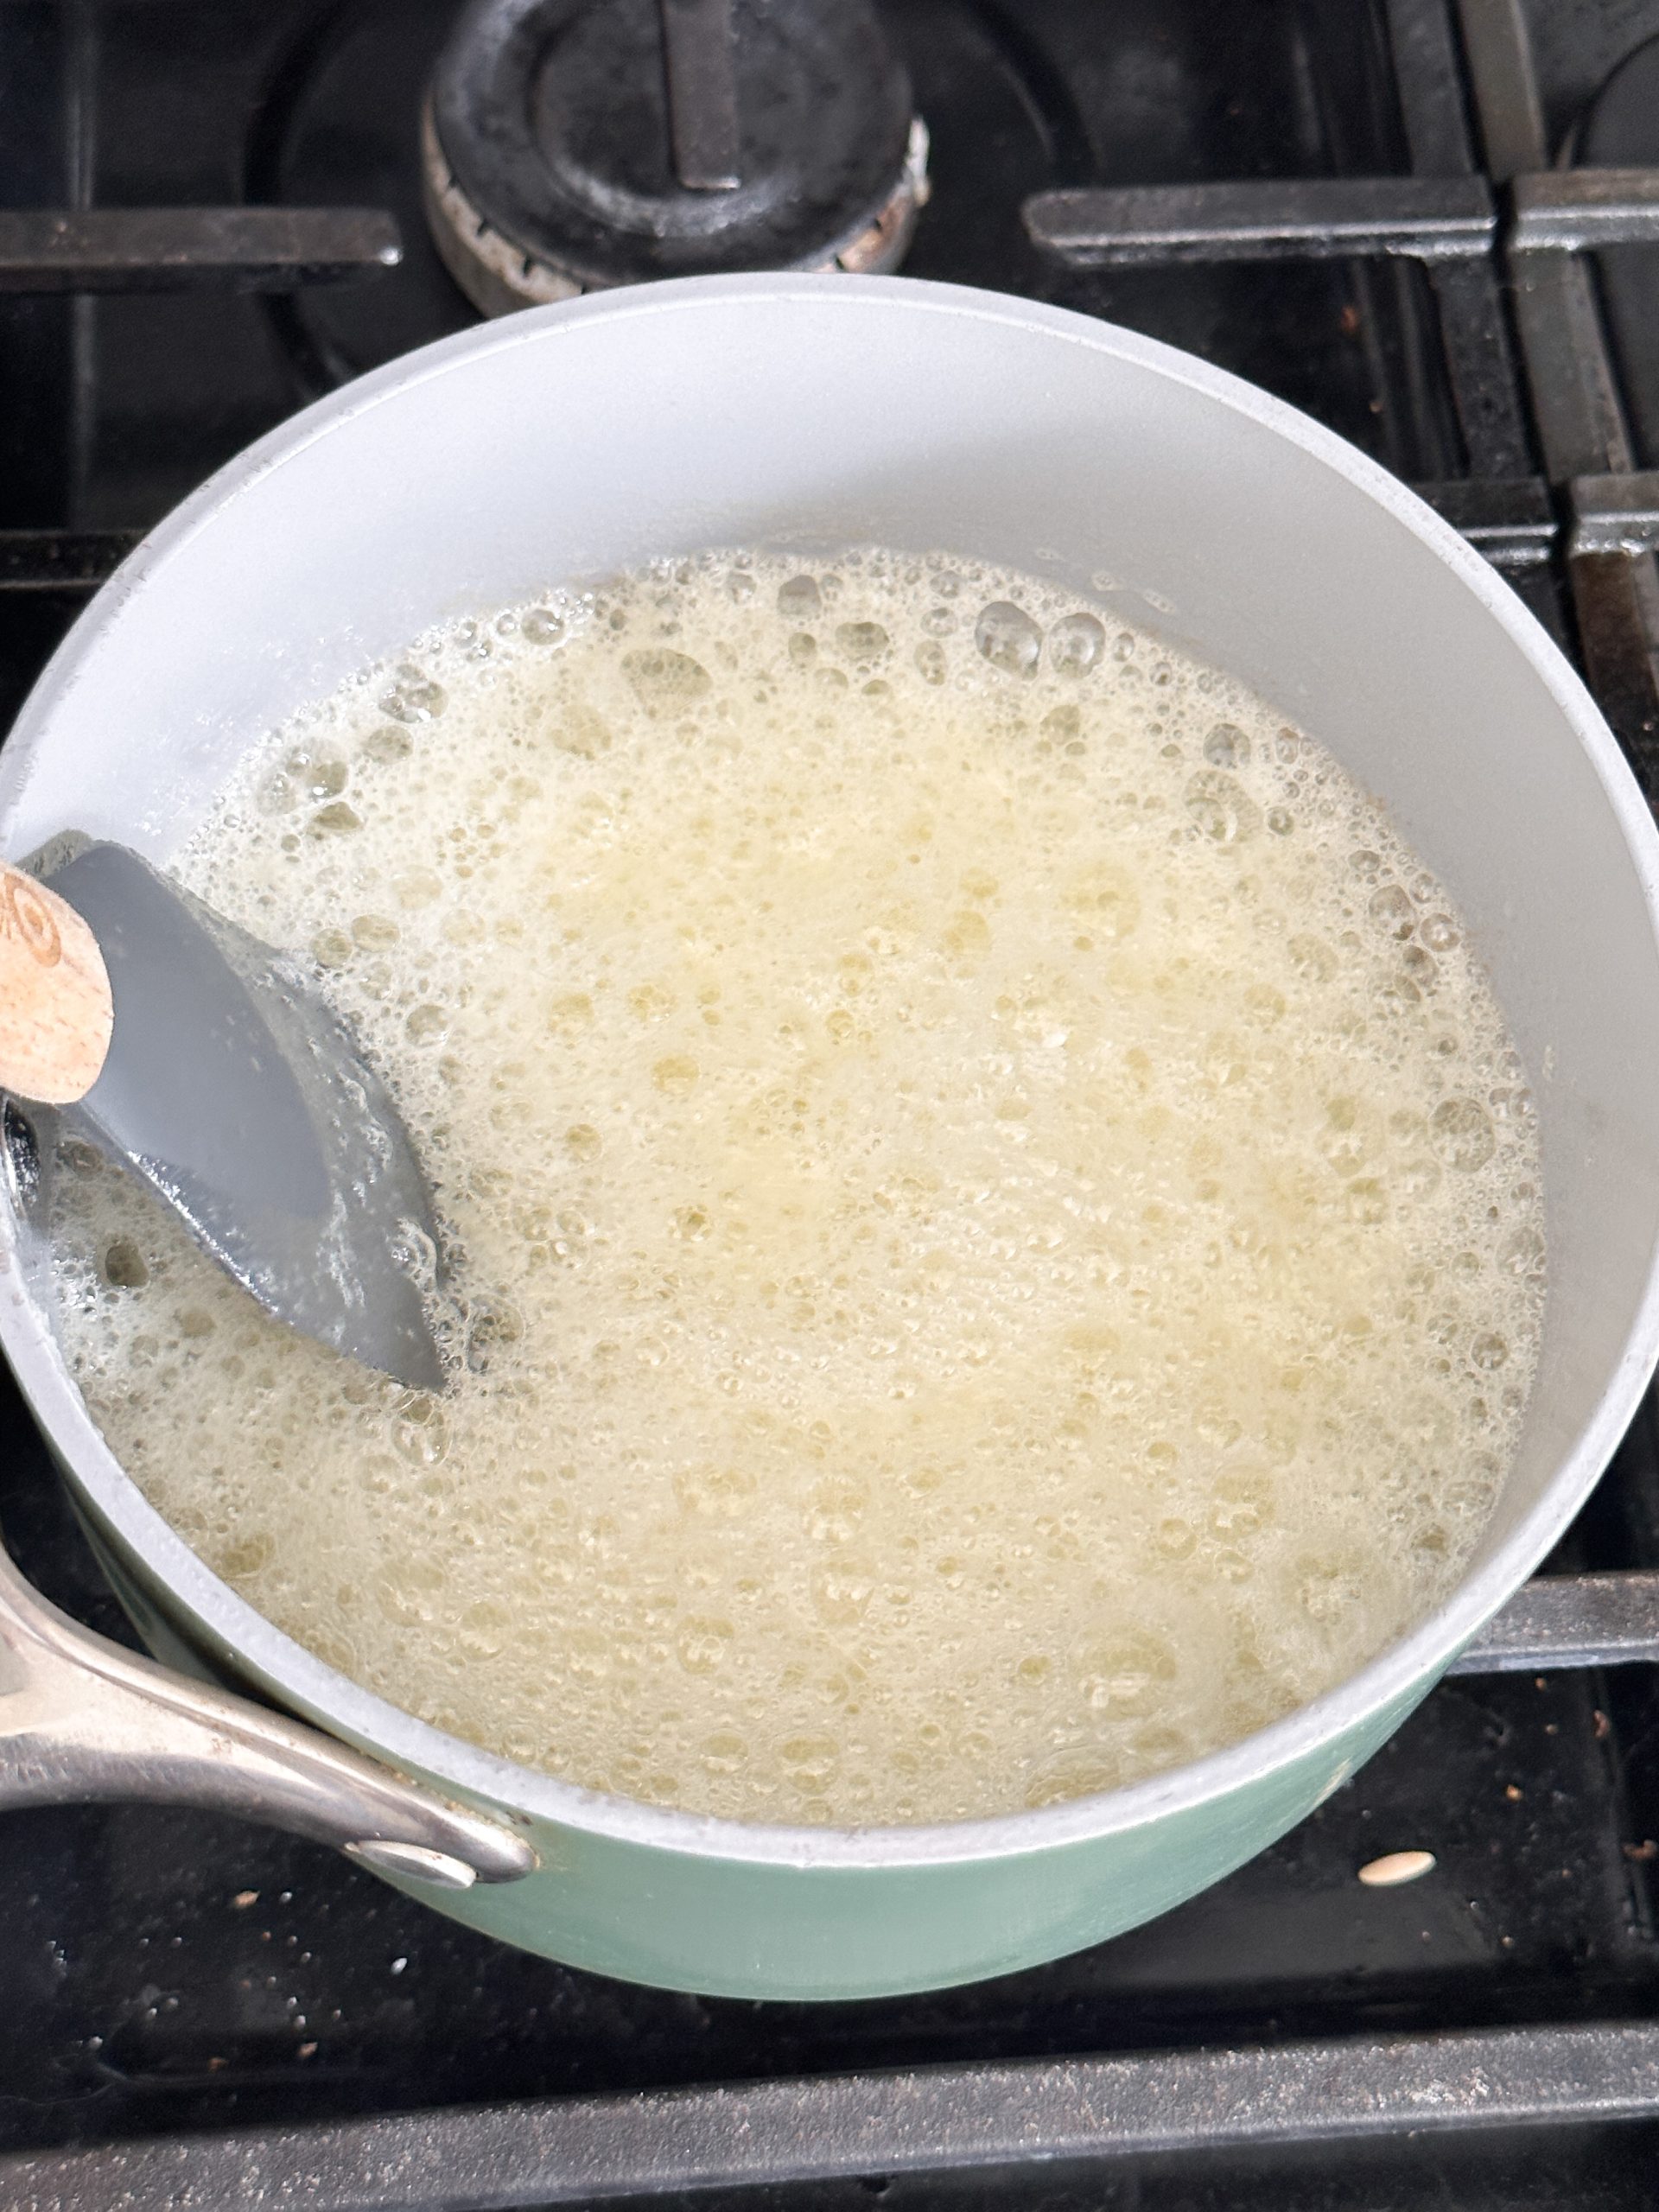 butter melted and foaming in a nonstick sauce pan